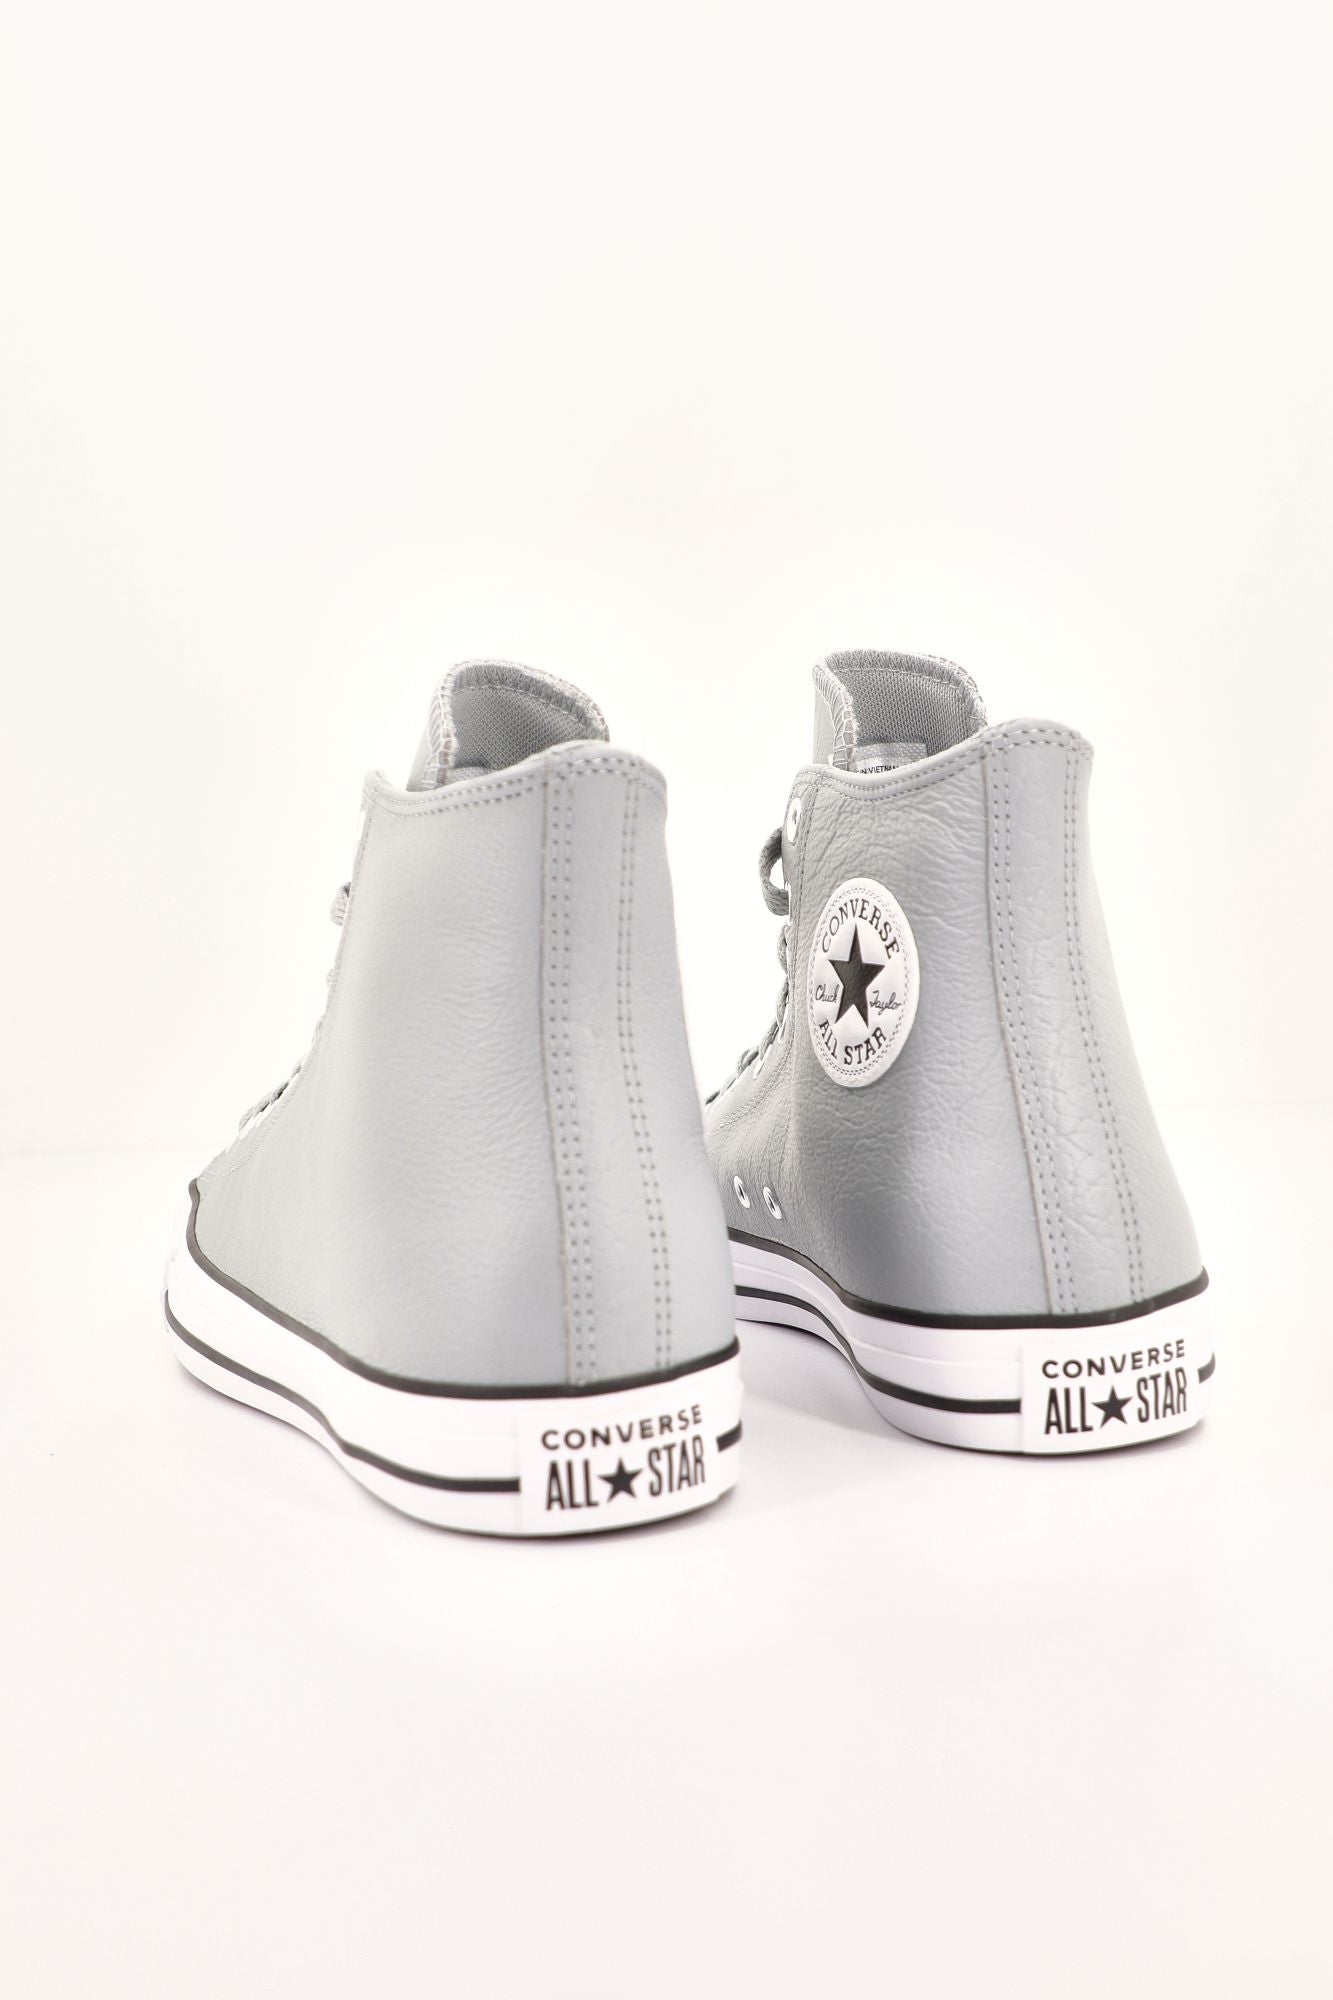 CONVERSE CHUCK TAYLOR ALL STAR TUMBLED LEATHER en color GRIS (4)